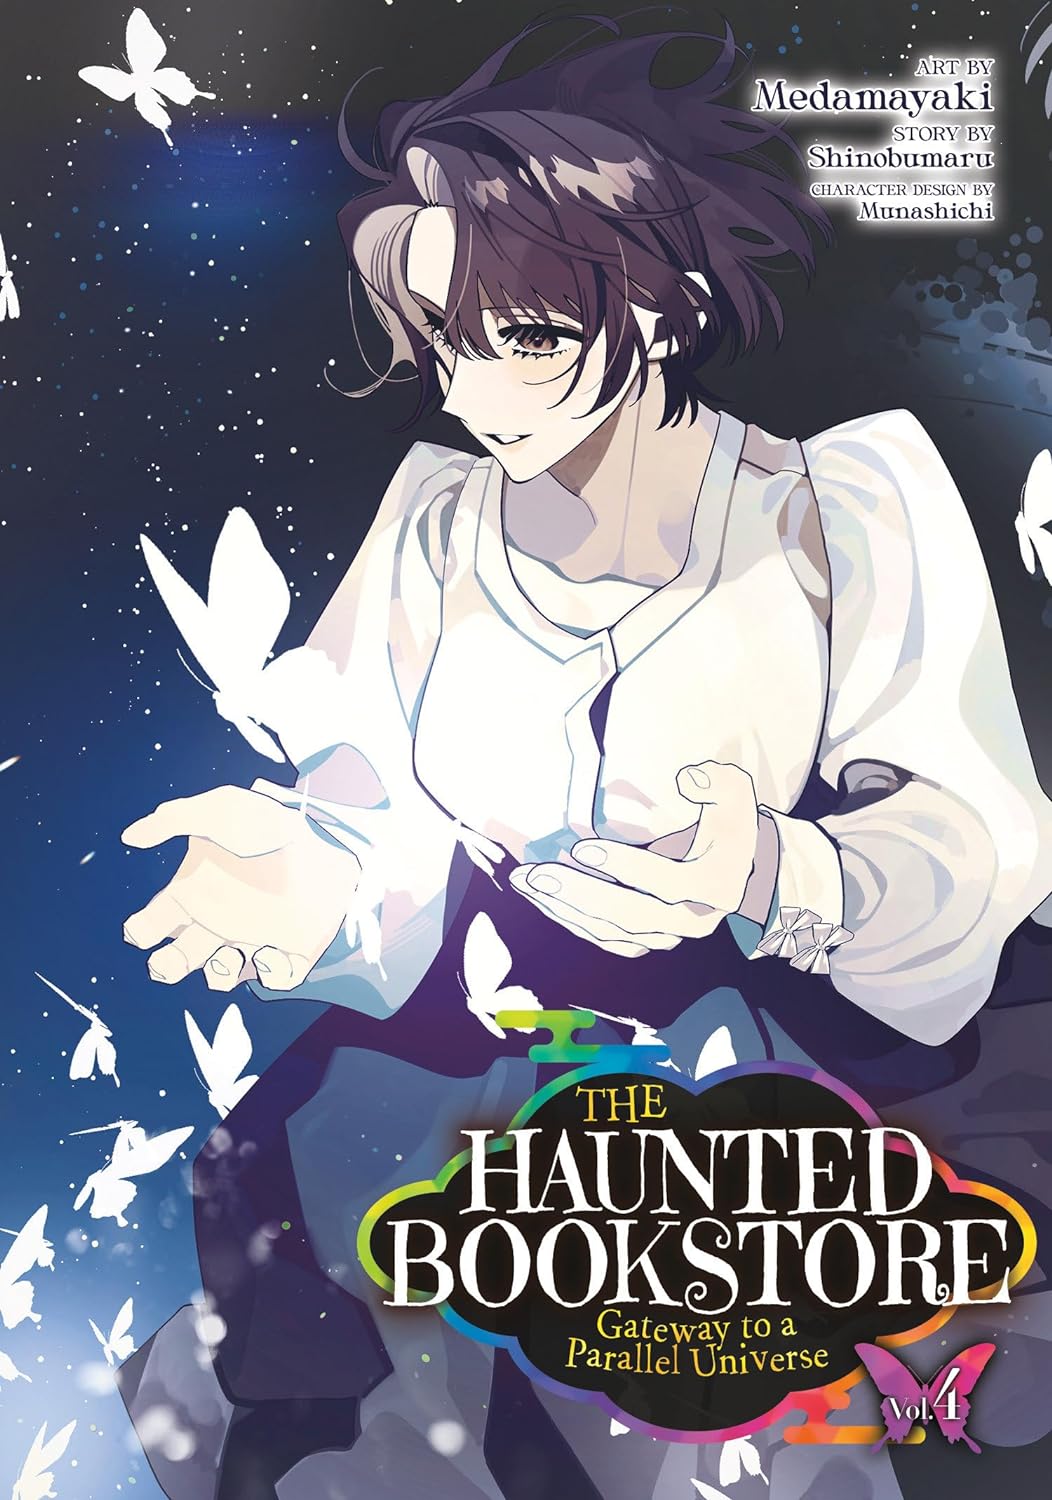 The Haunted Bookstore - Gateway to a Parallel Universe (Manga) Vol. 04